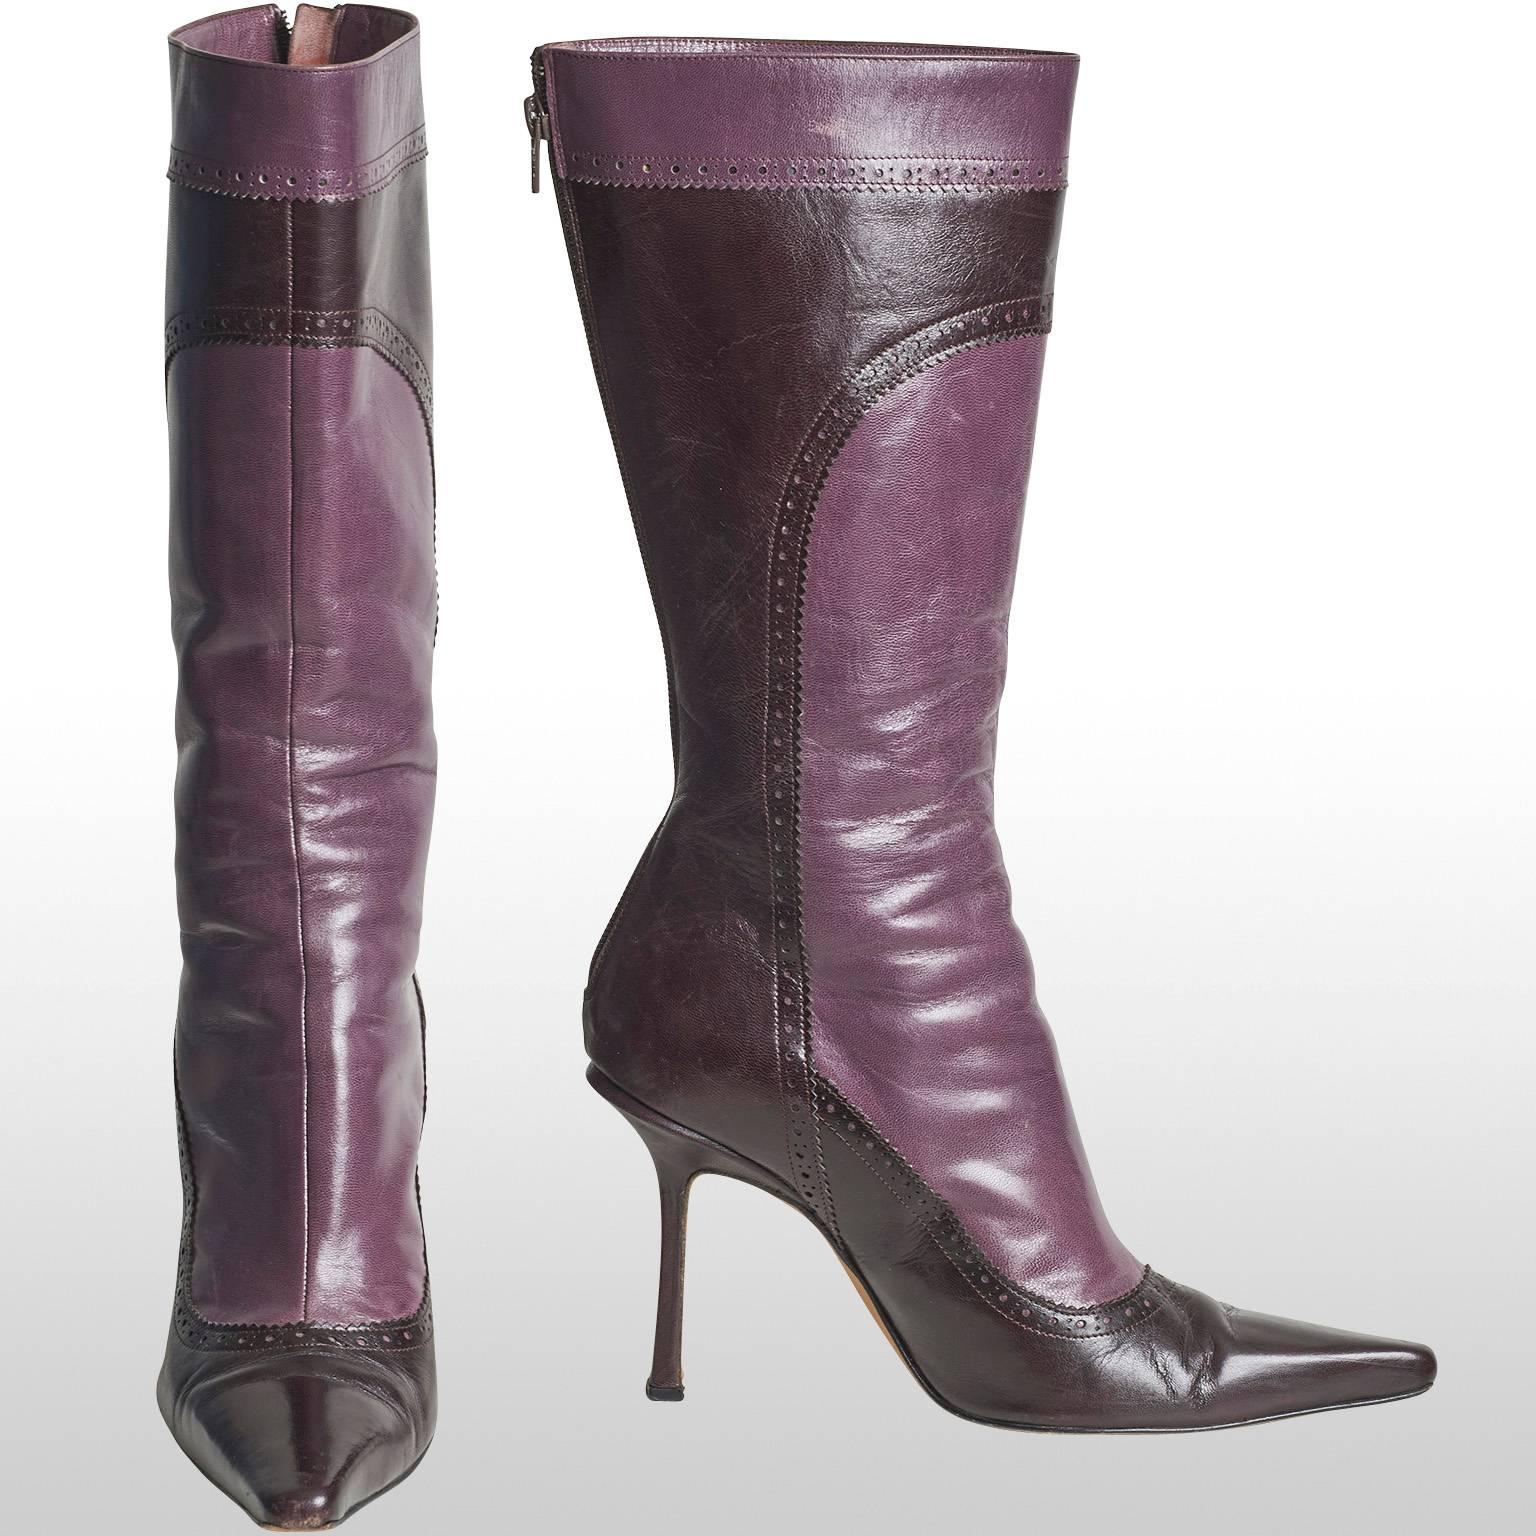 These are beautiful Jimmy Choo high heel boots. They are made out of two purple leather tones and have a leather stitch detail, which some might know as broguing. The total length of the boot is 16 inches which includes the hight of the heel which